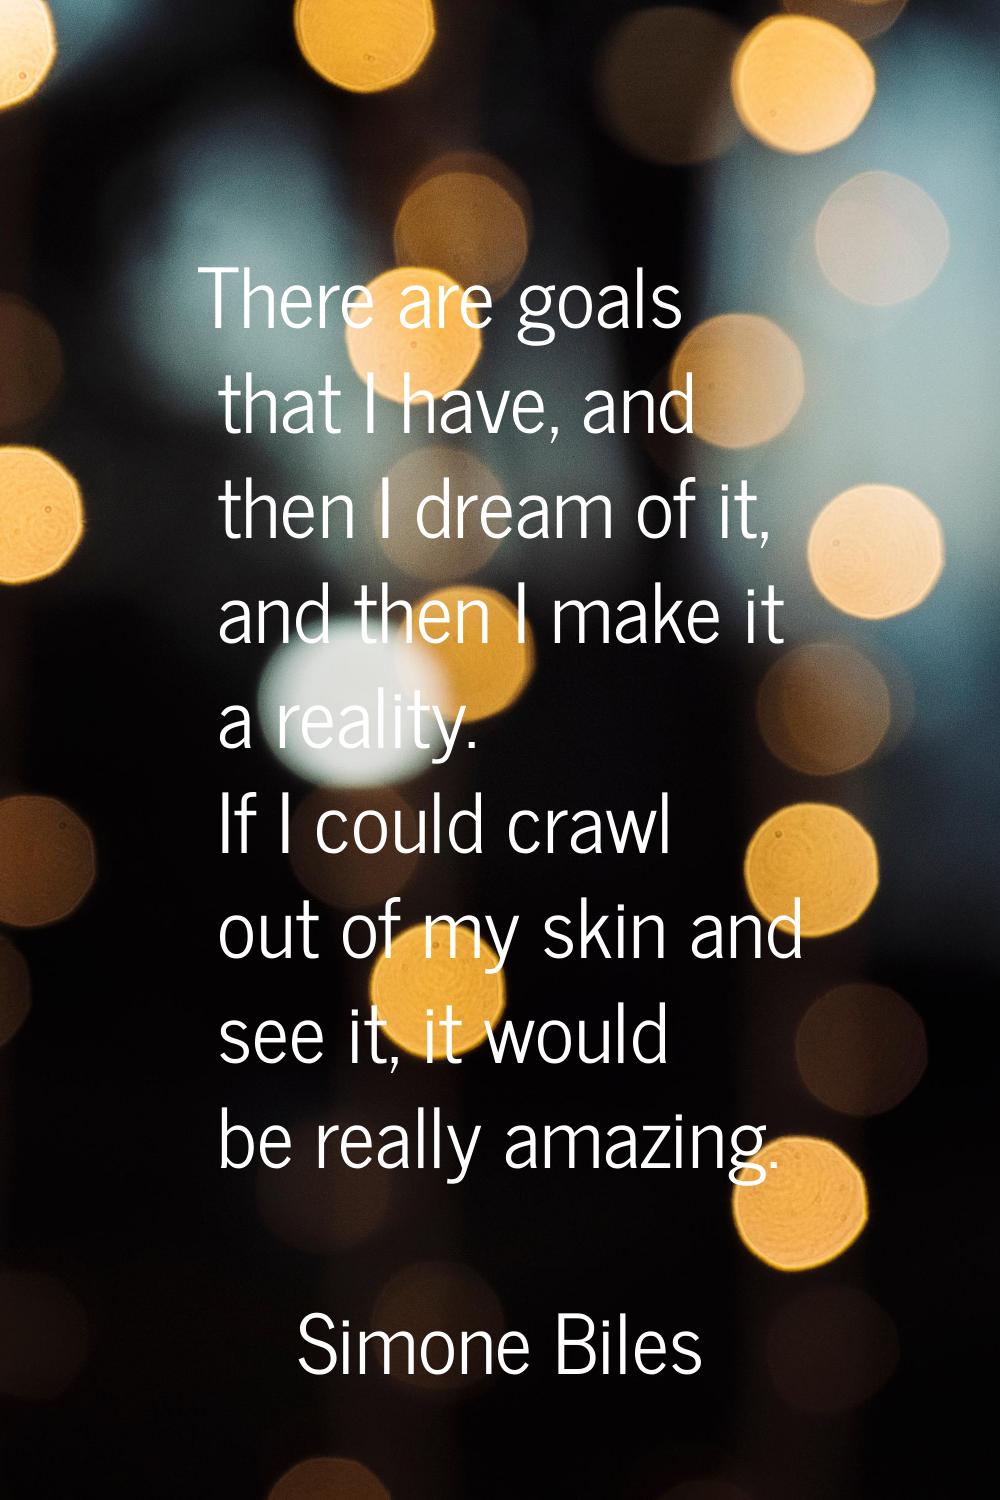 There are goals that I have, and then I dream of it, and then I make it a reality. If I could crawl